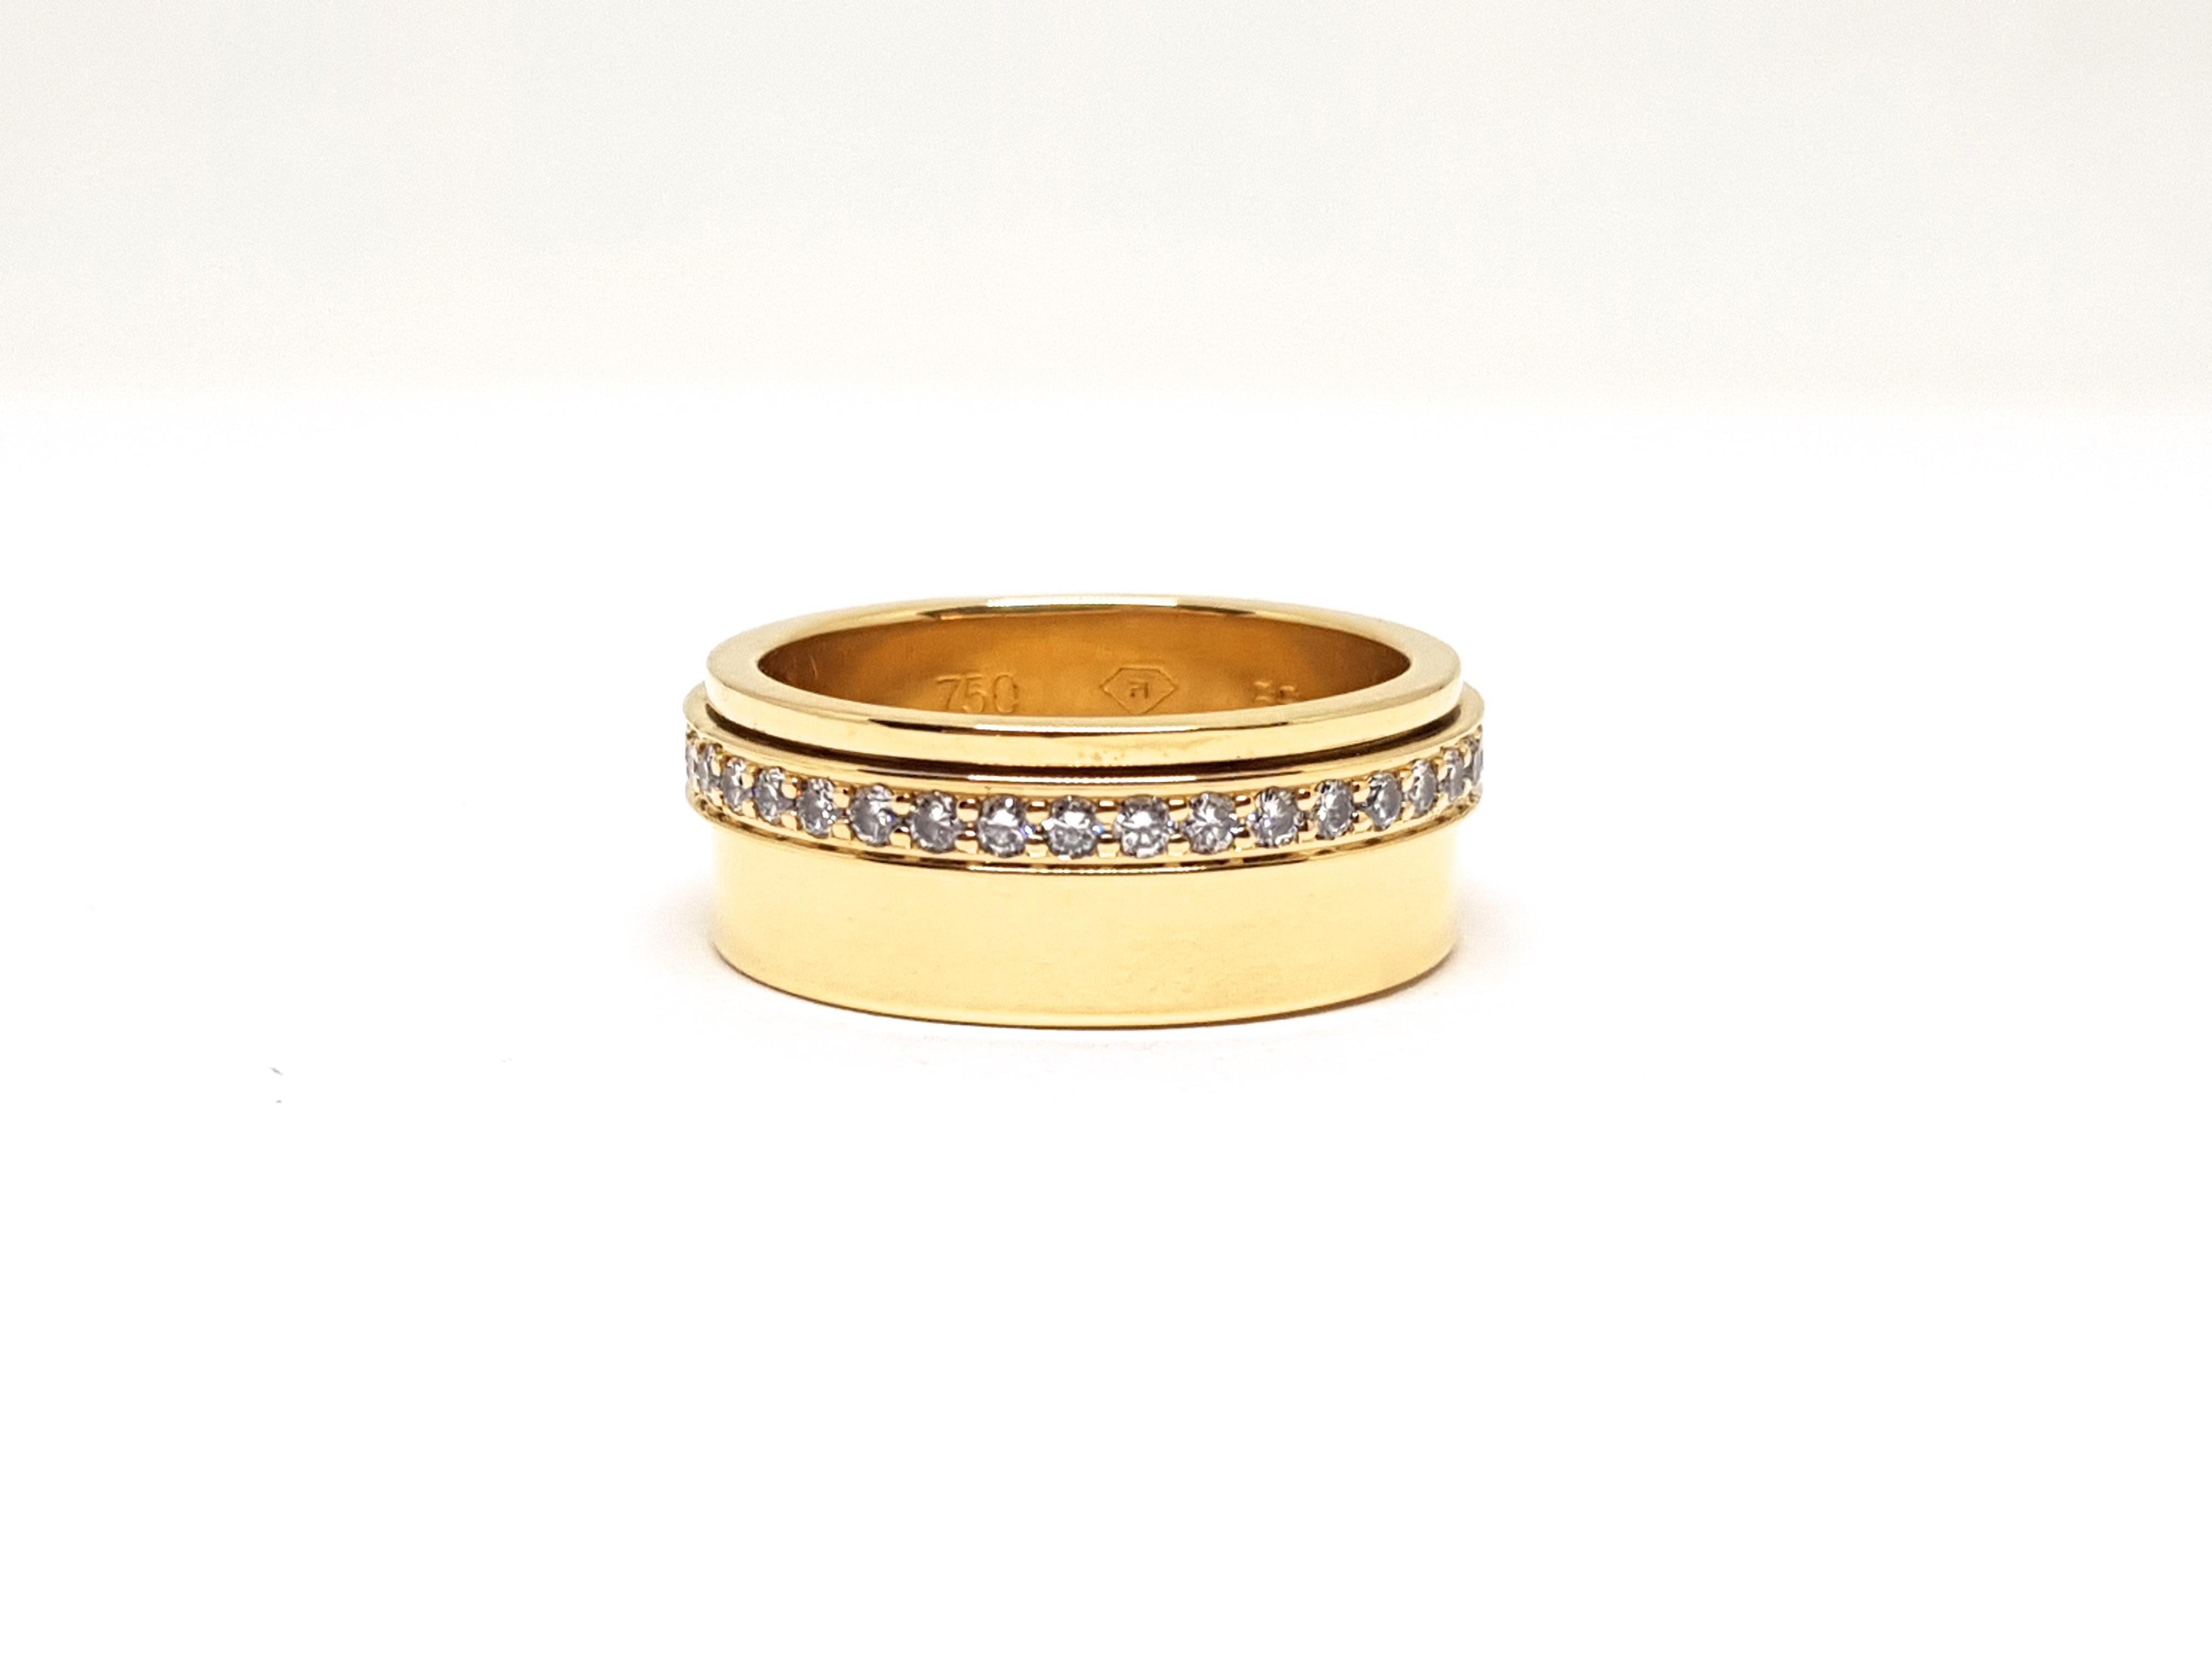 Gold: 18 carat yellow gold
Weight: 11.21gr.
Diamonds: 0.63ct. colour: D clarity: LC / IF
Width: 0.8 cm.
Ring size: 7 1/4
All our jewellery comes with a certificate appraisal and 5 years guarantee  
Please take a look at my other pieces of jewellery